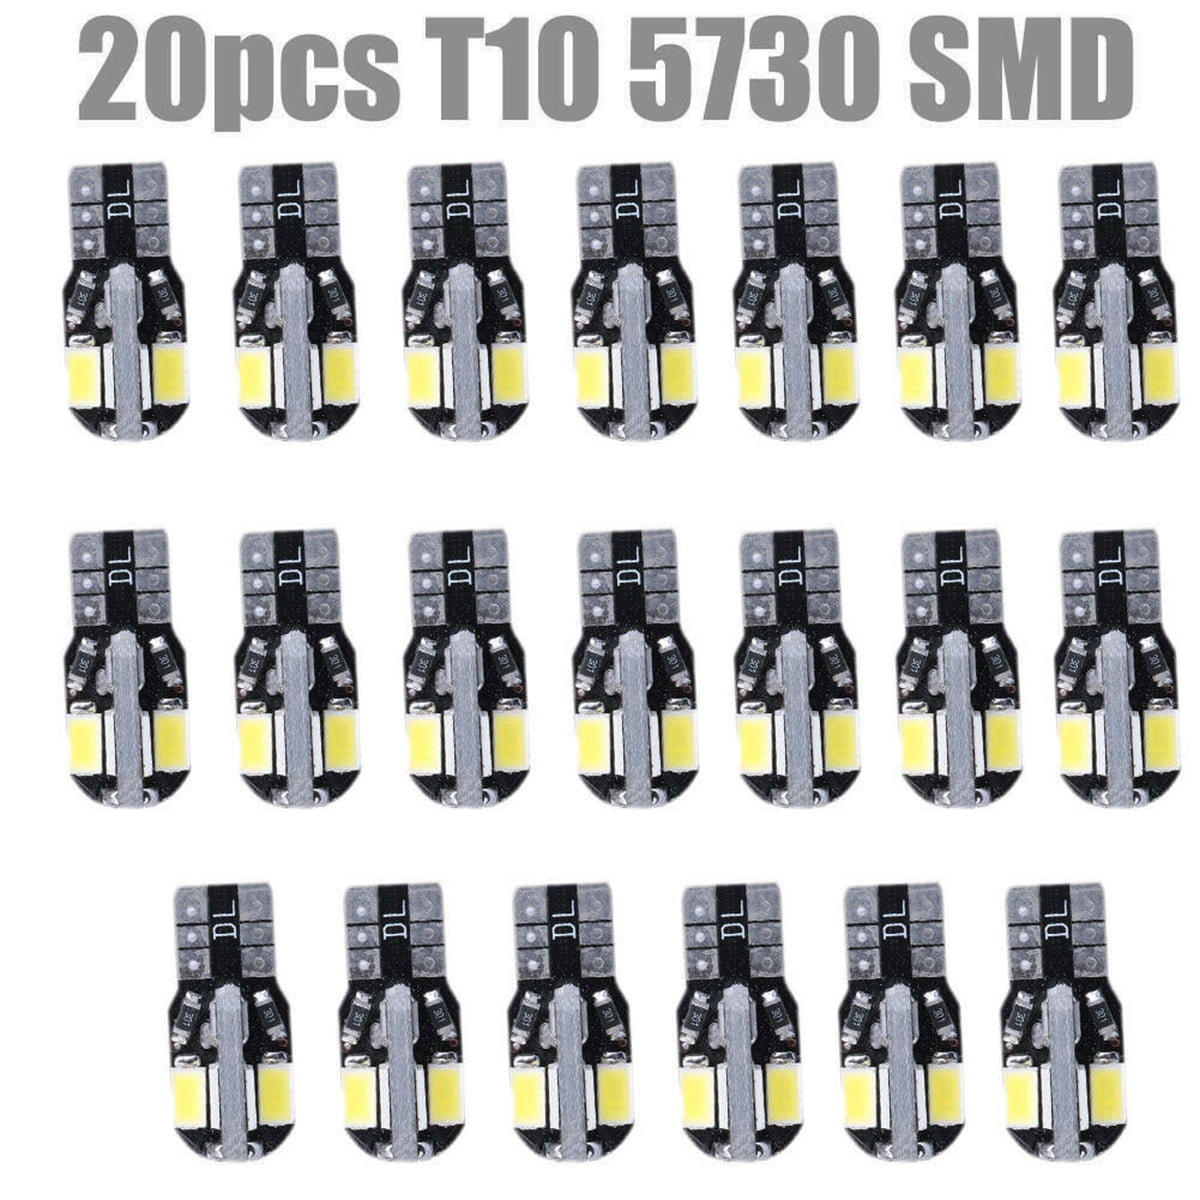 JAVR Pack of 20 5th Generation 5050 Chipsets 5SMD Lighting Source for 12V License Plate Map Dome Lights Lamp Bright White 194 T10 168 2825 501 W5W Car Interior Replacement LED Light Bulb